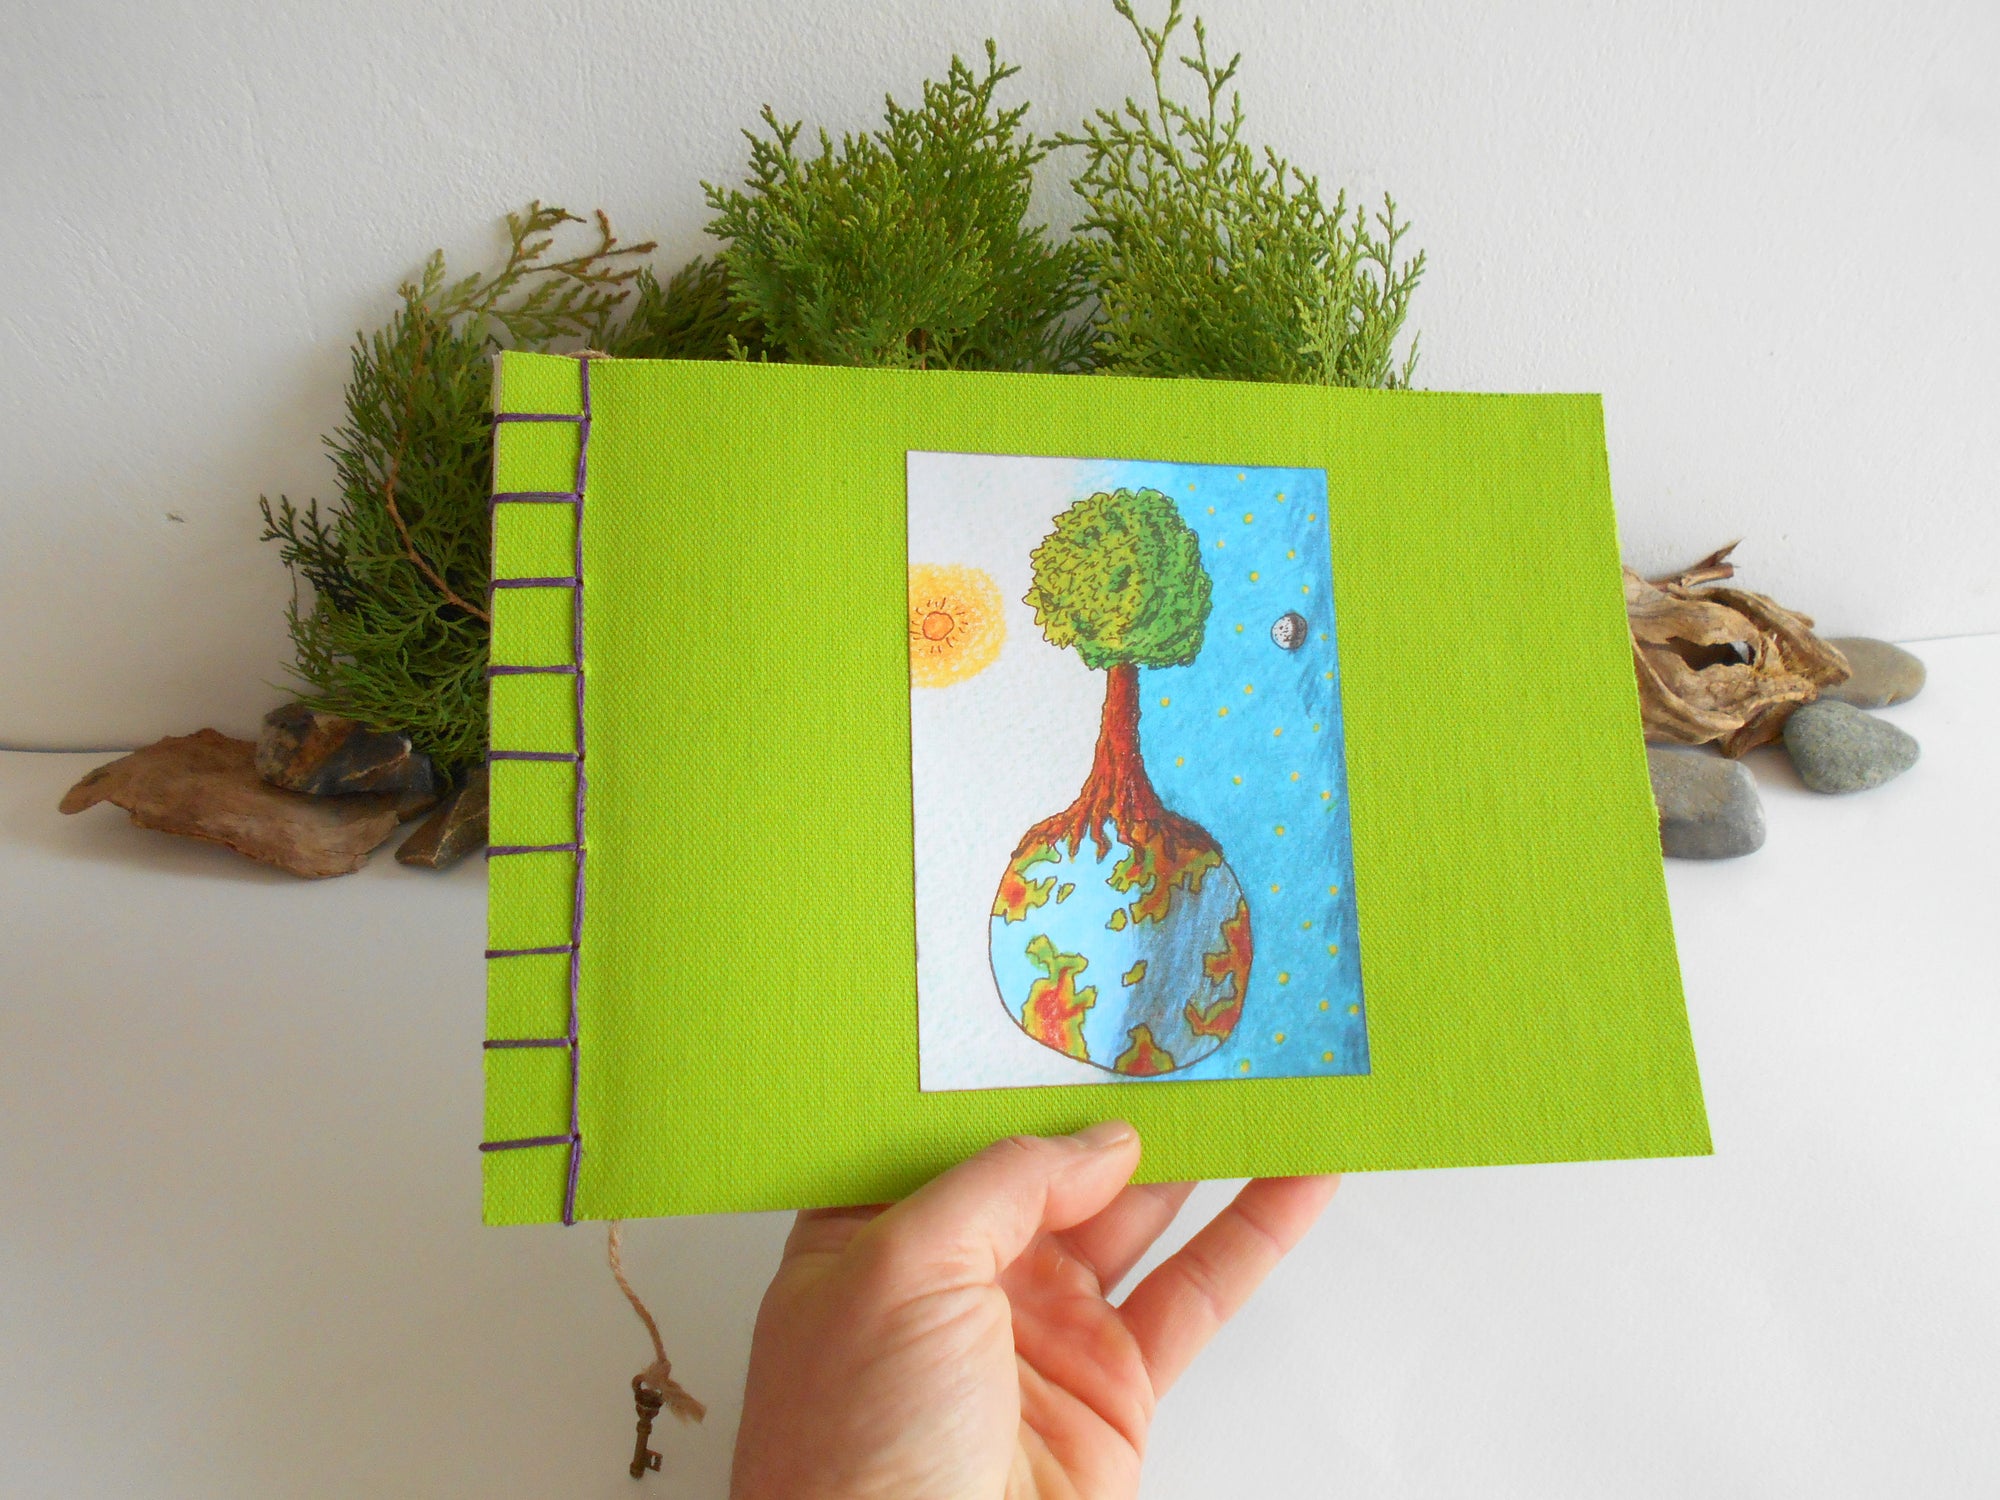 Art sketchbook with fabric soft covers- Hemp stab binding- 100% recycled pages- eco-friendly fabric journal with inspirational abstract art- planet and tree art journal with a bookmark